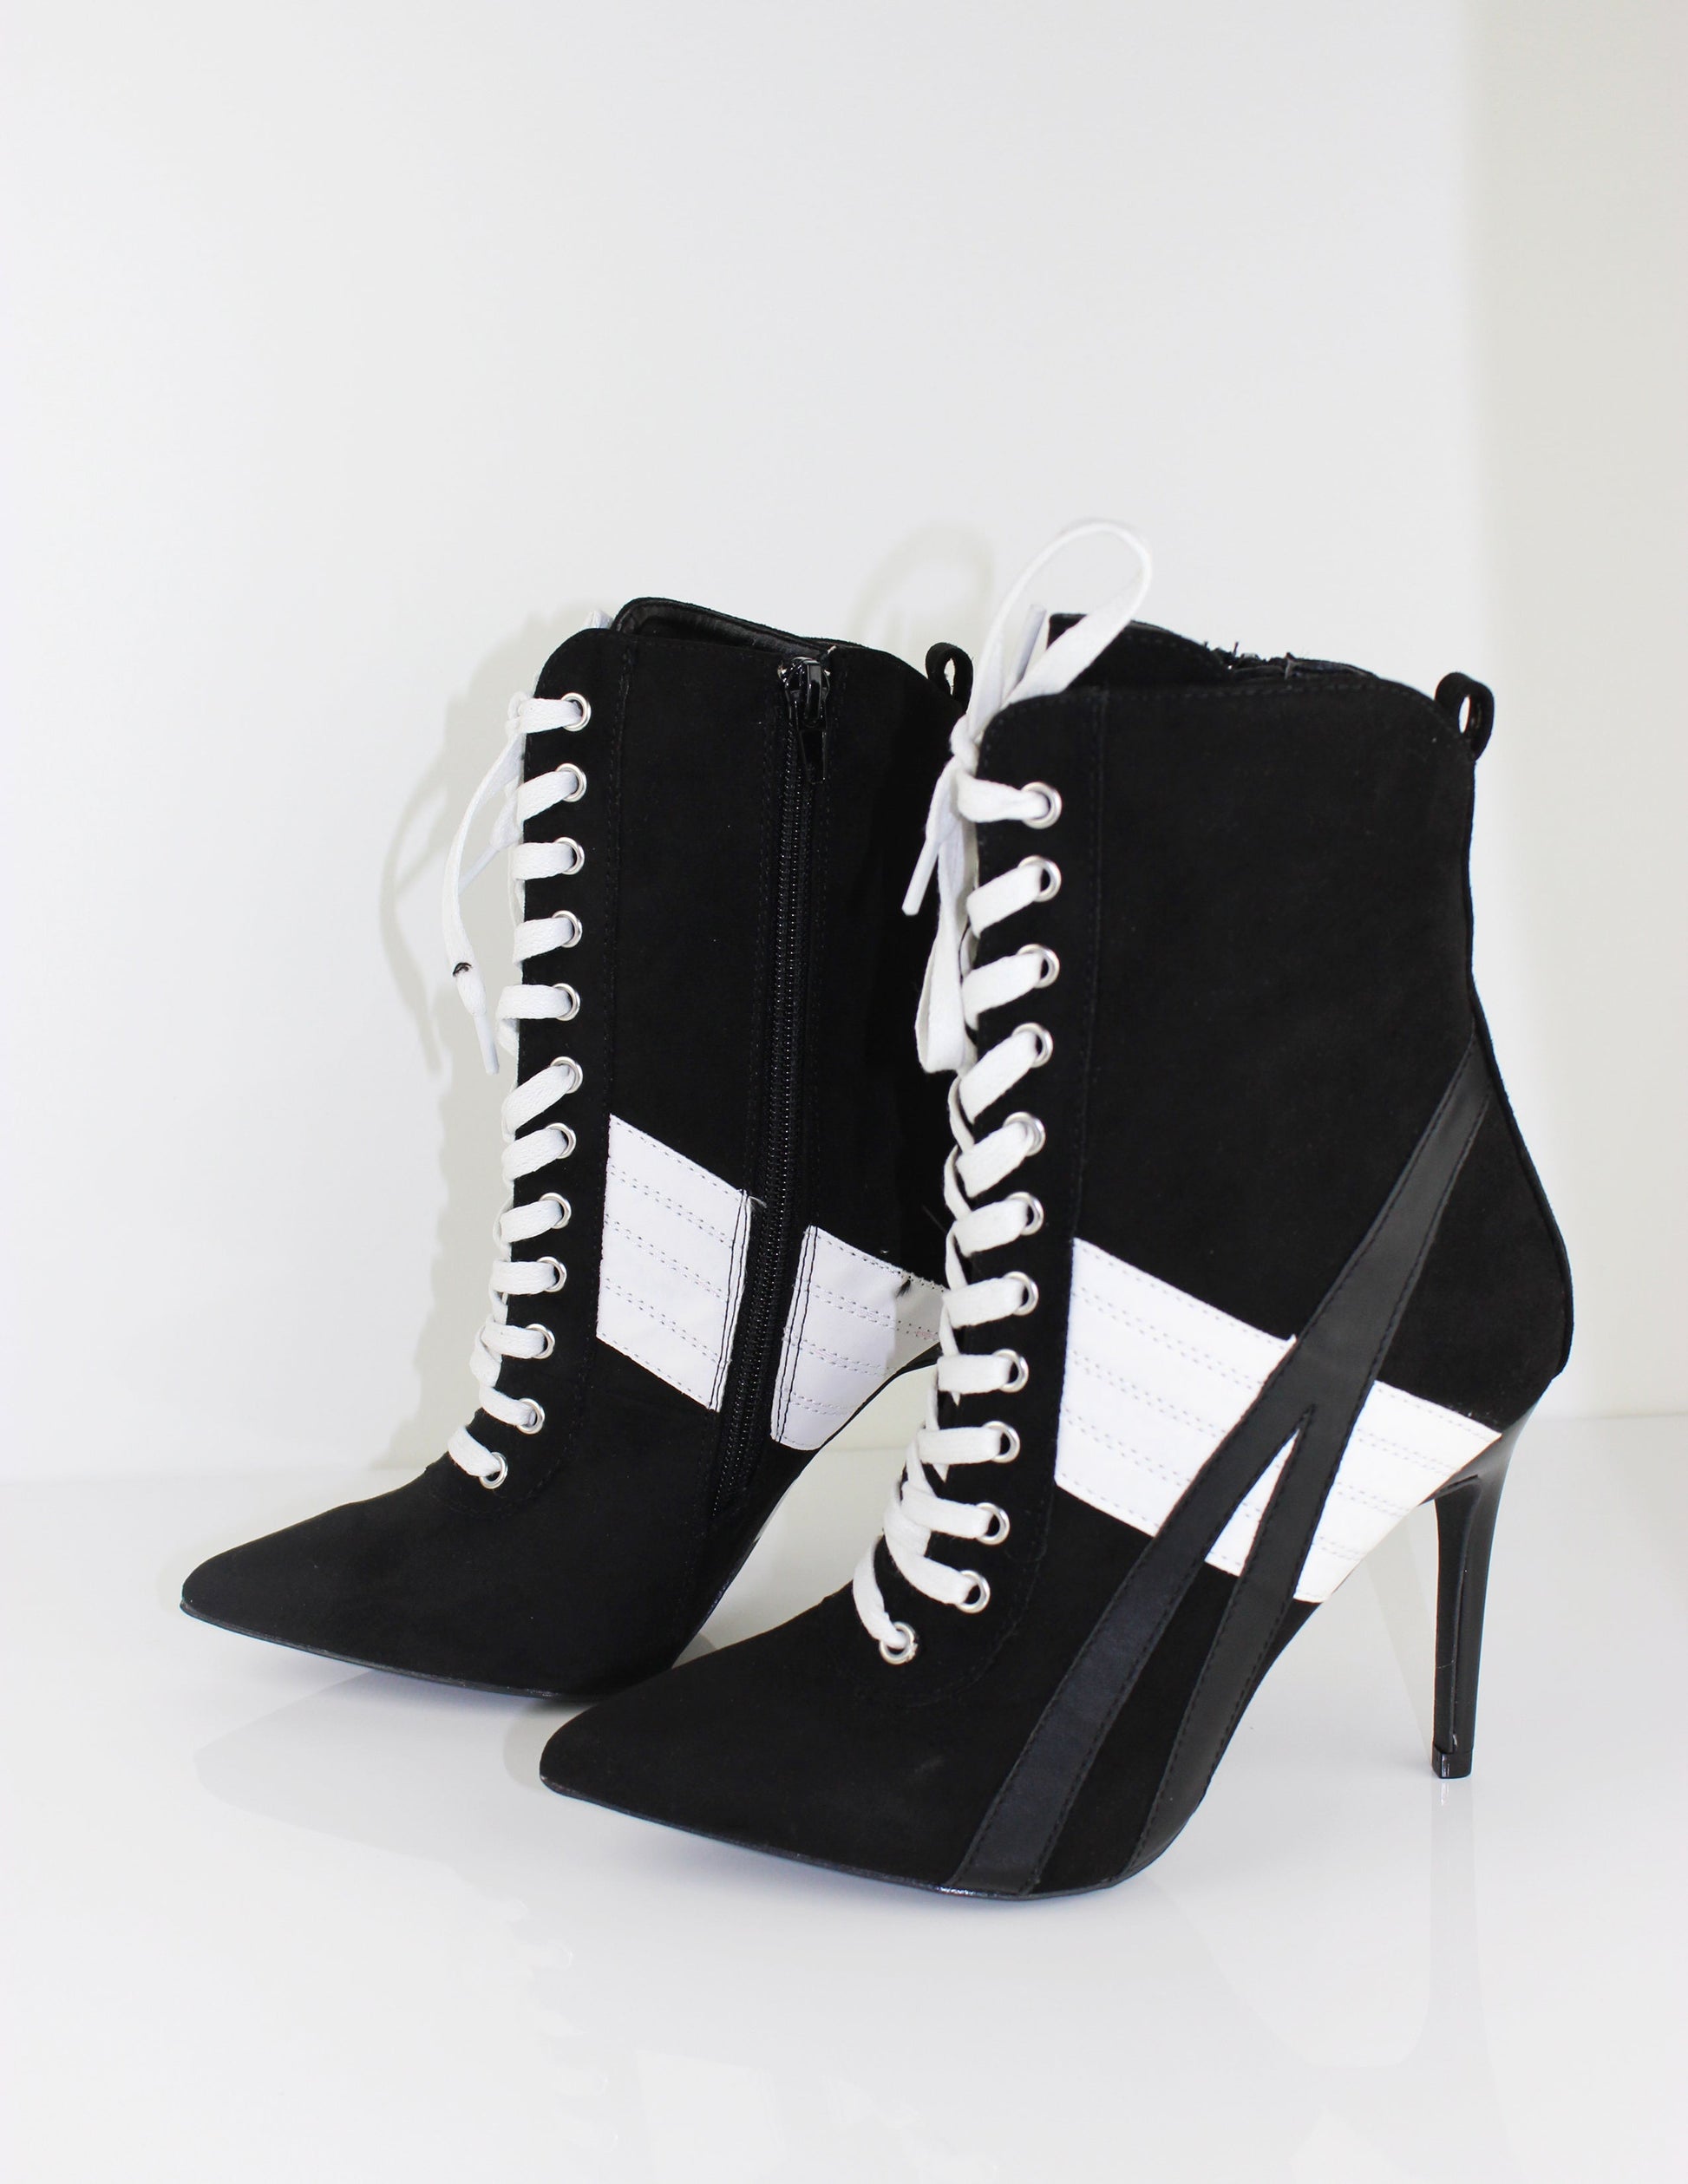 black and White vegan leather high heel shoes sneakers